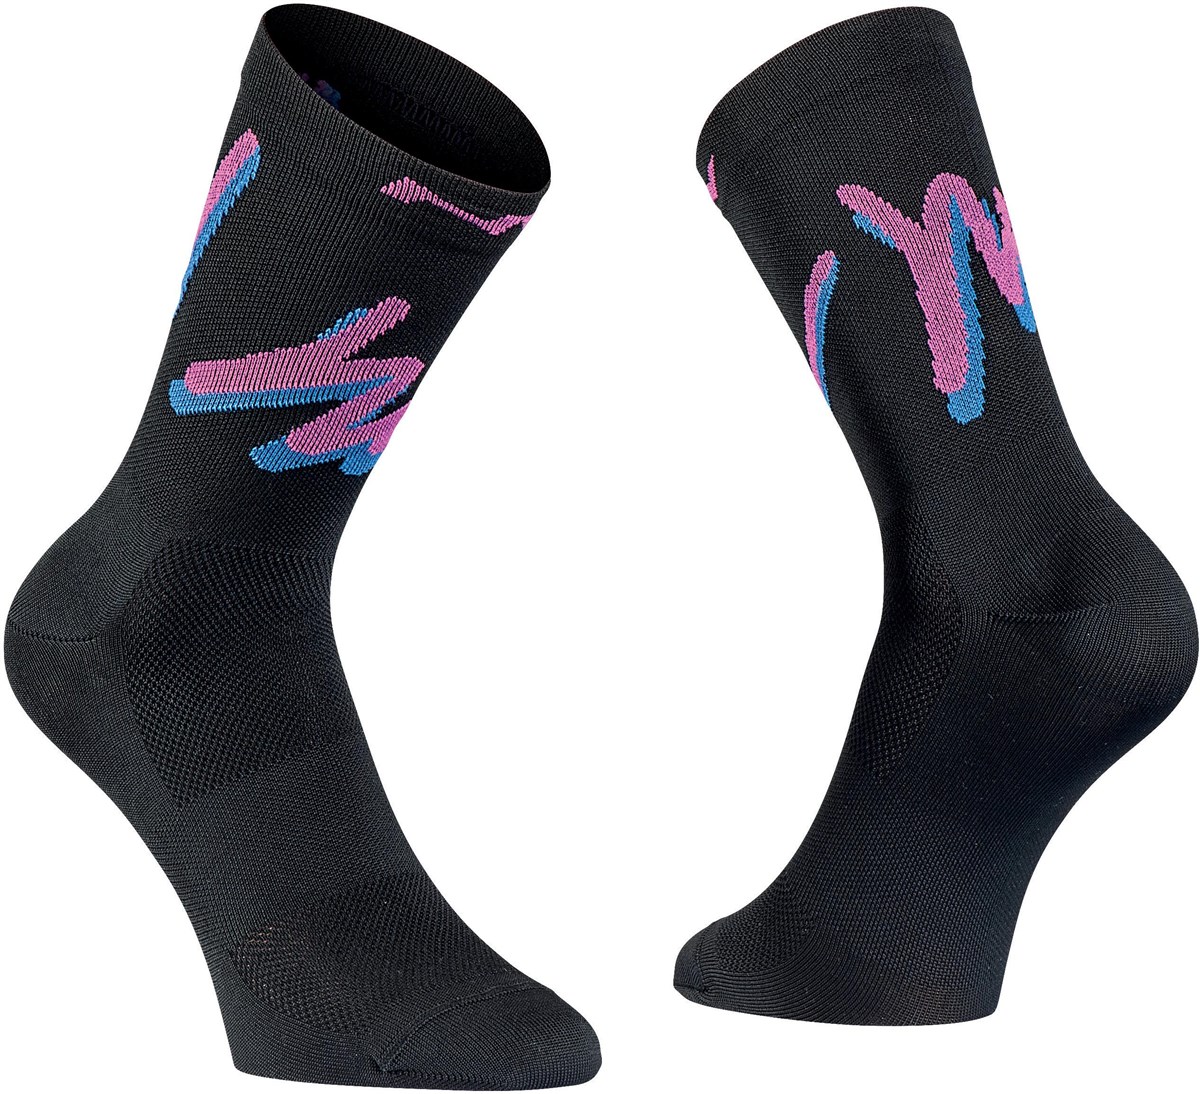 Northwave Vacation Cycling Socks product image